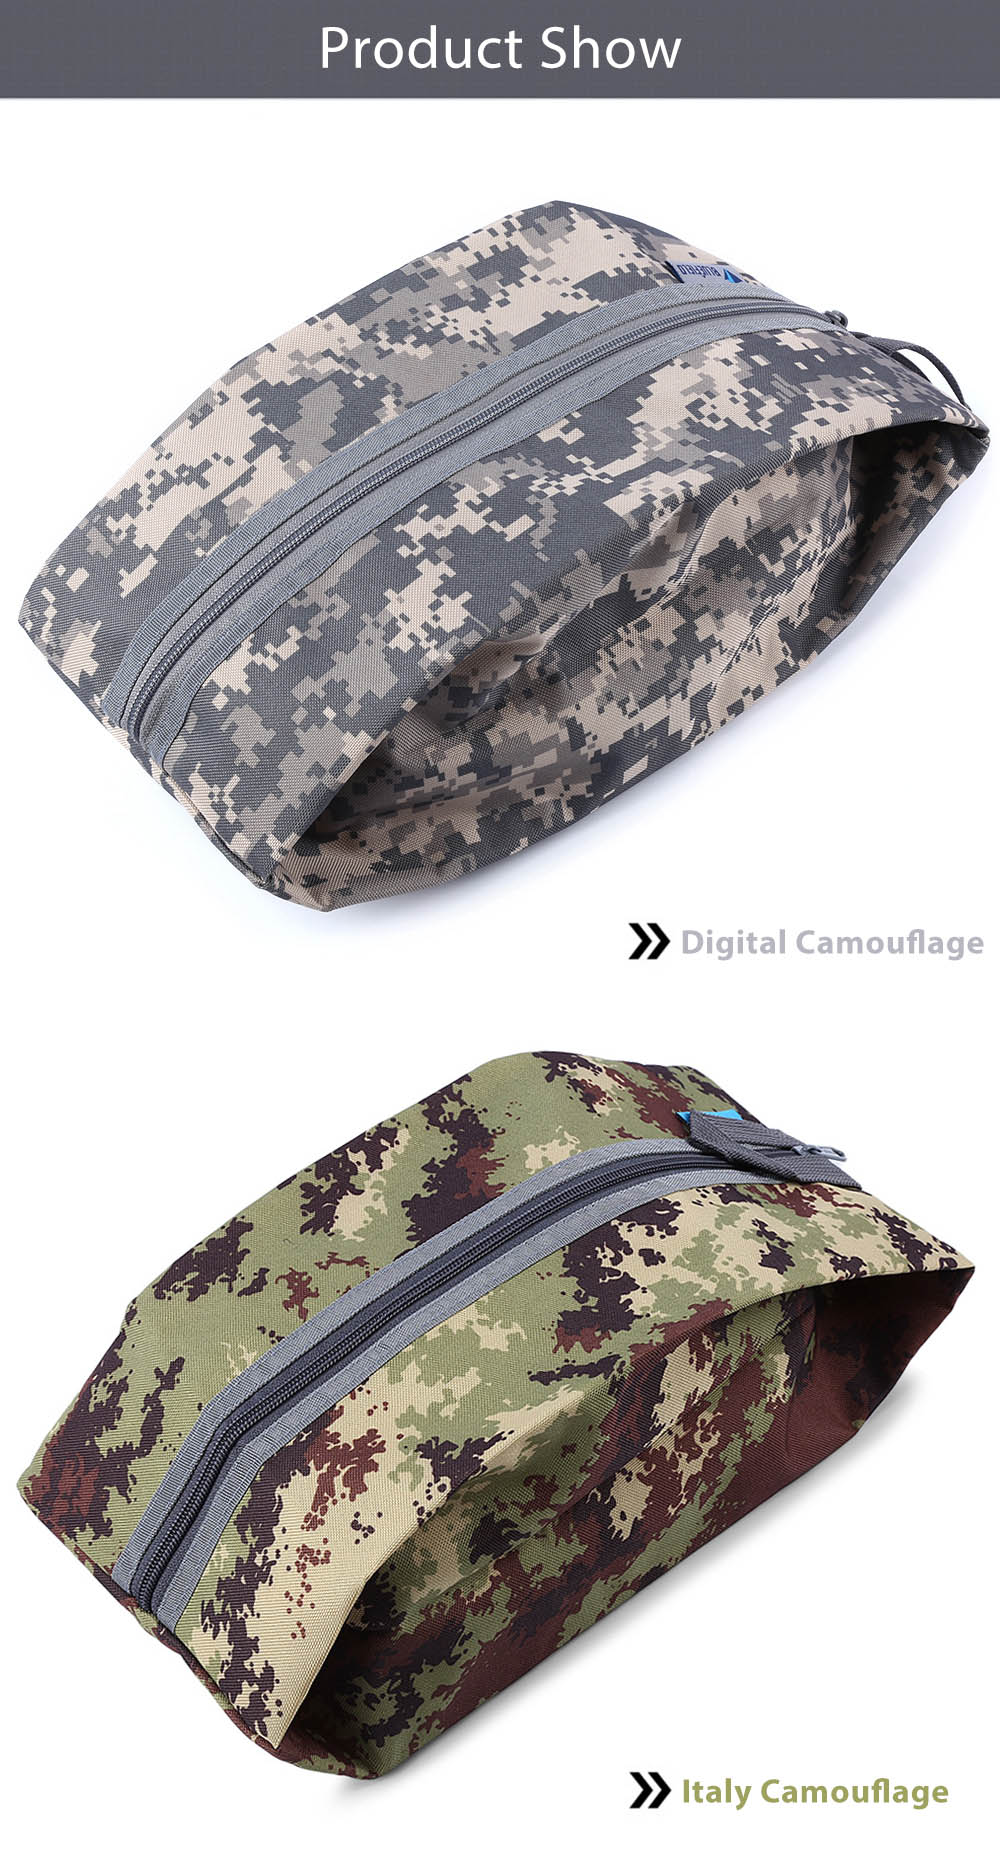 Bluefield Thick Camouflage Shoe Bag Multifunction Travel Tote Storage Case